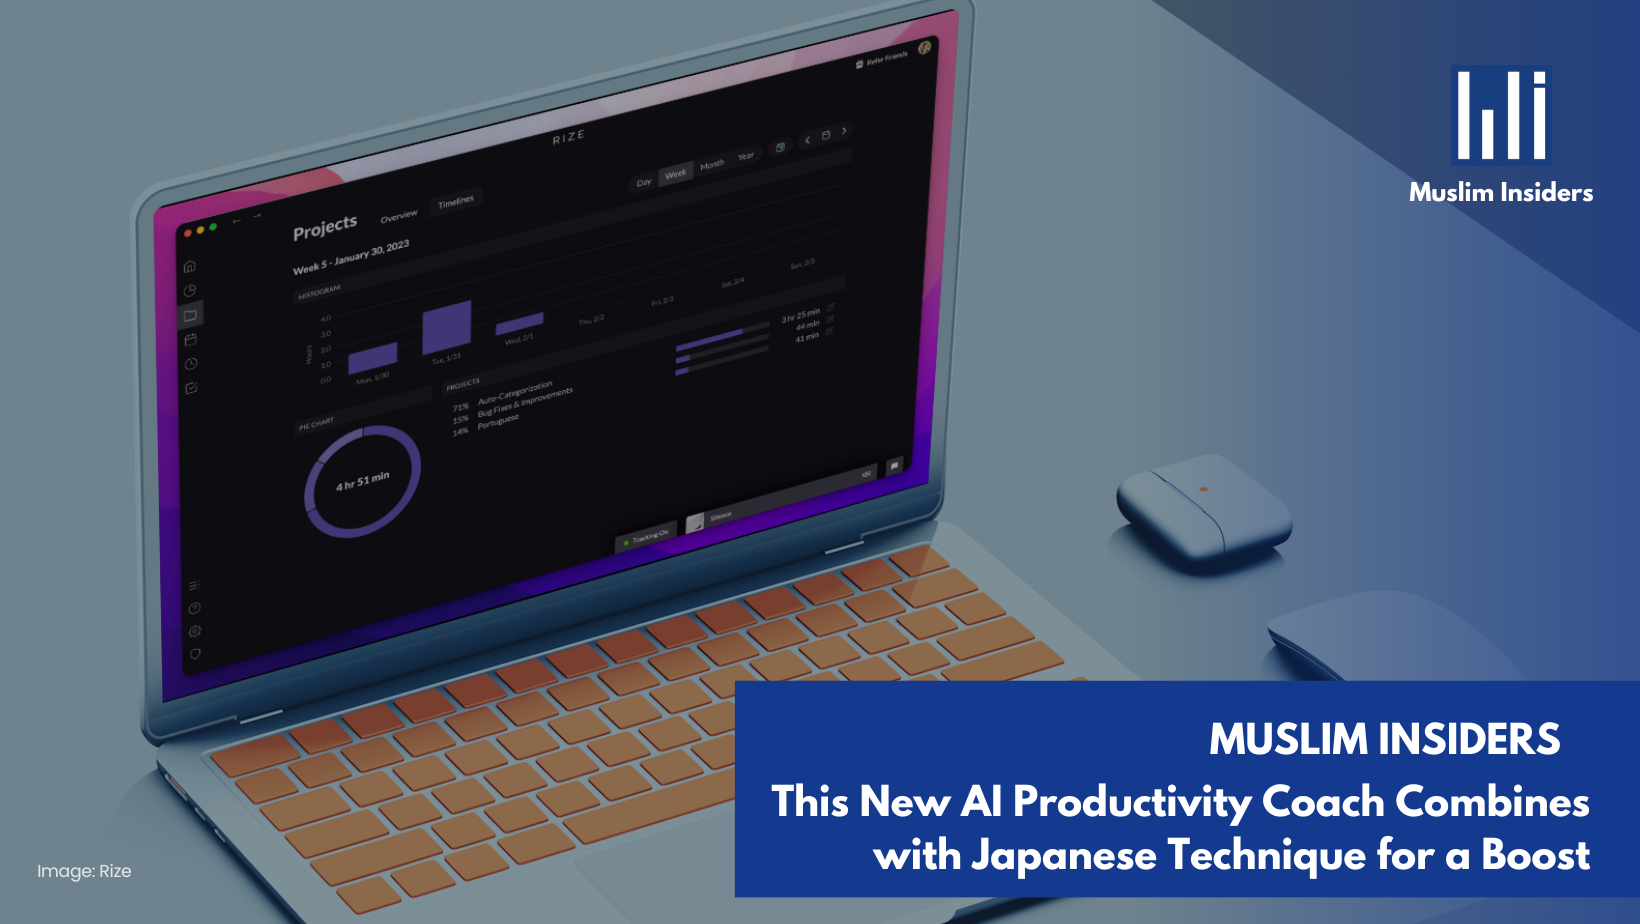 Muslim Insiders - This New AI Productivity Coach Combines with Japanese Technique for a Boost